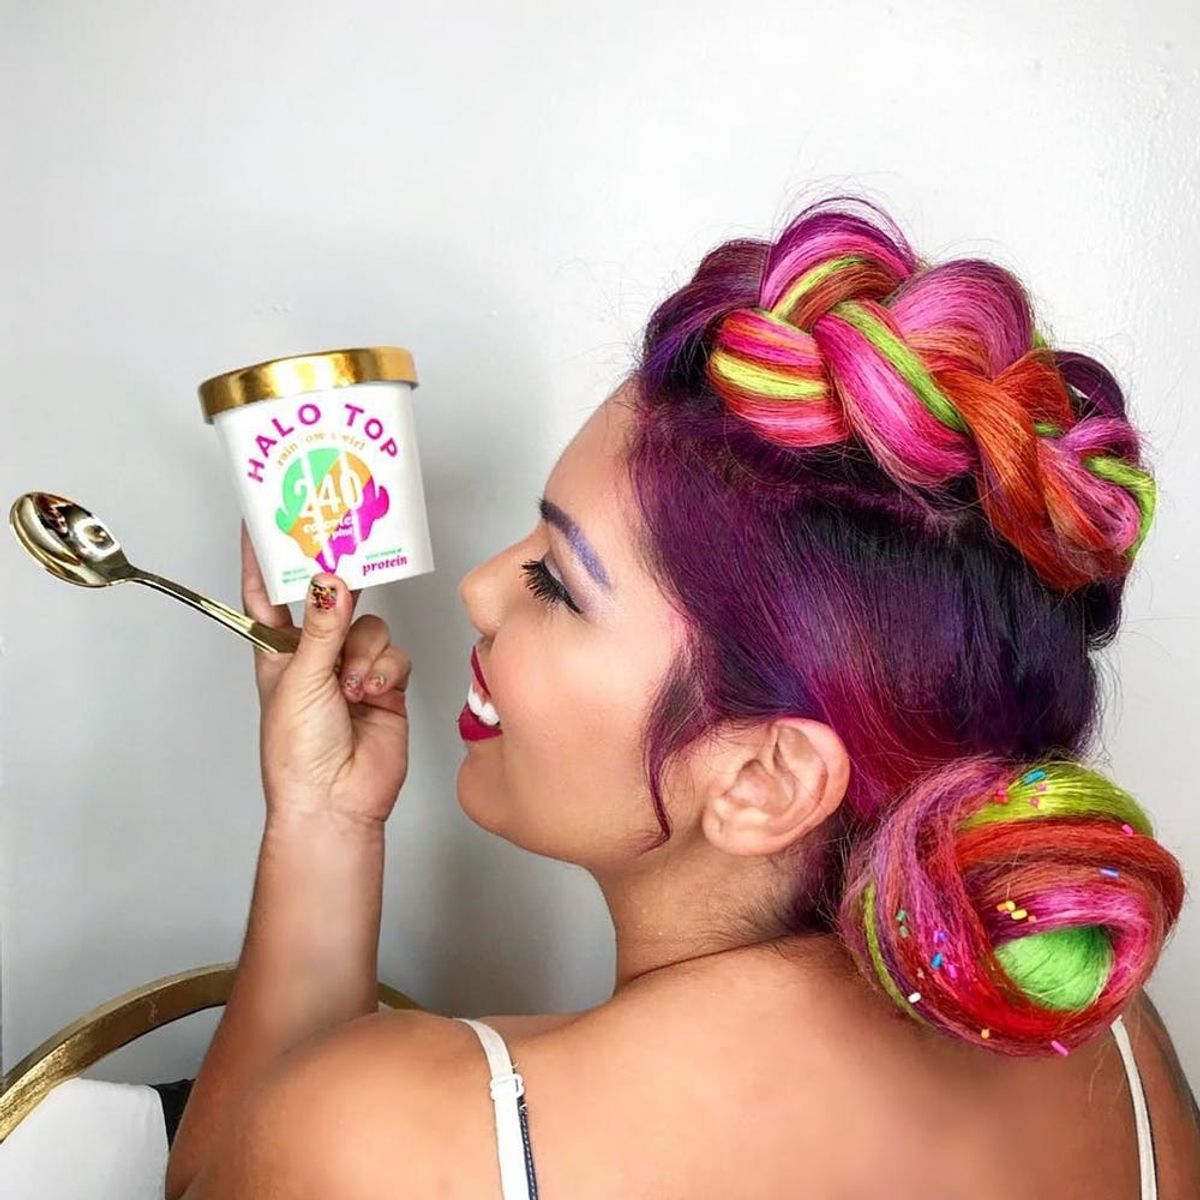 You Guys, Halo Top Ice Cream Hair Is Somehow a Thing